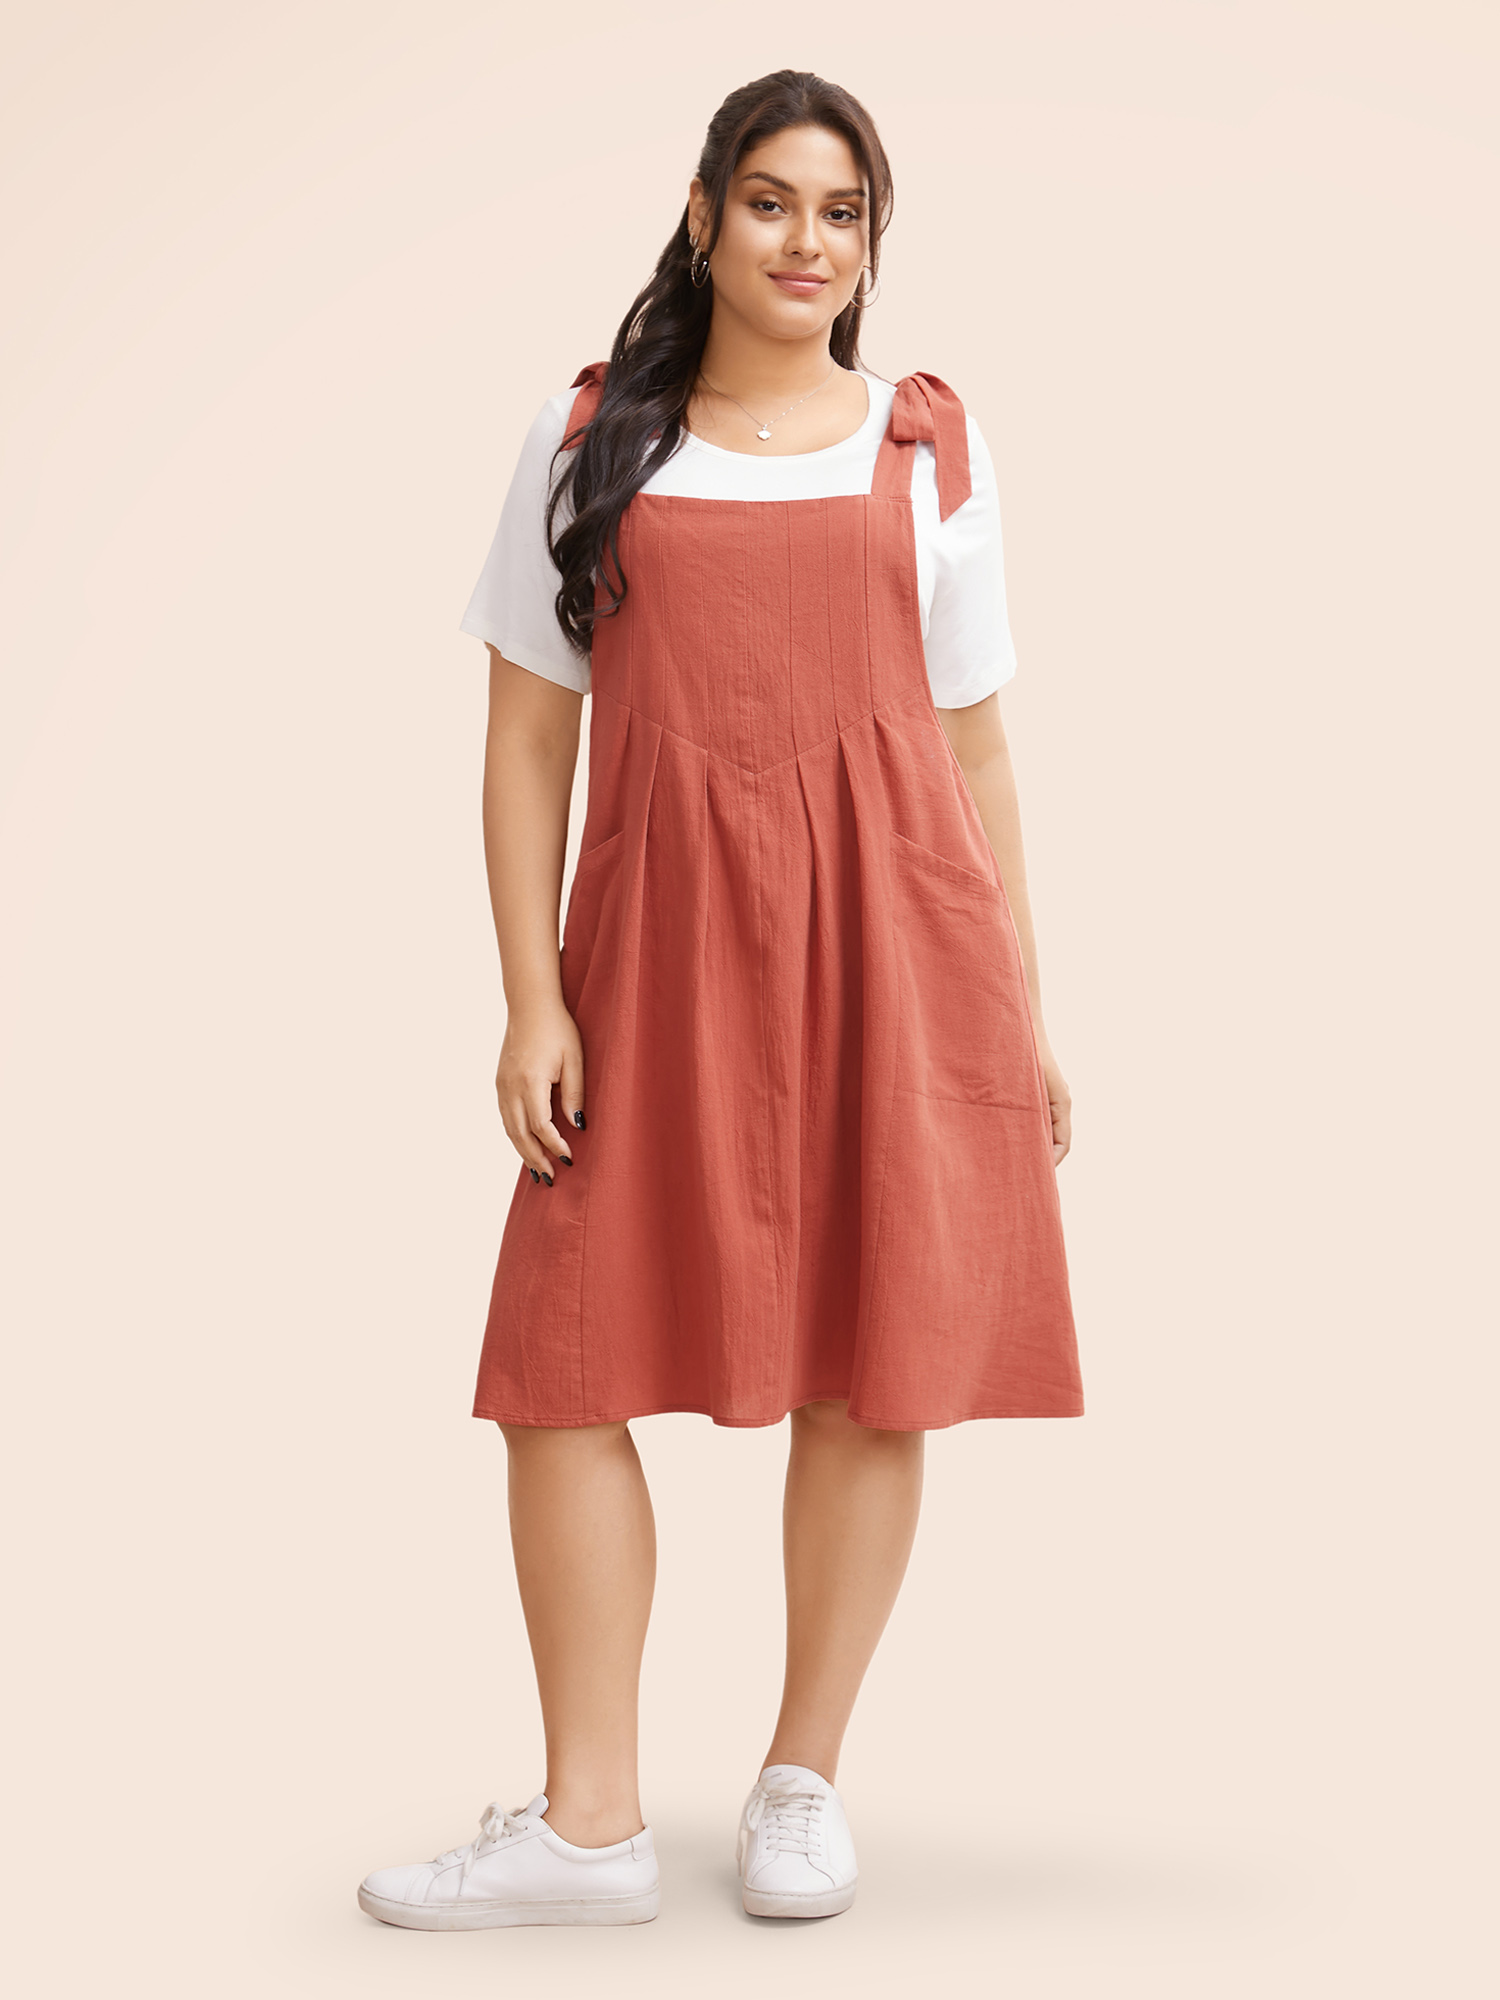 

Plus Size Solid Pleated Hem Pocket Tie Shoulder Overall Dress Rust Women Casual Pleated Spaghetti Strap Sleeveless Curvy Knee Dress BloomChic